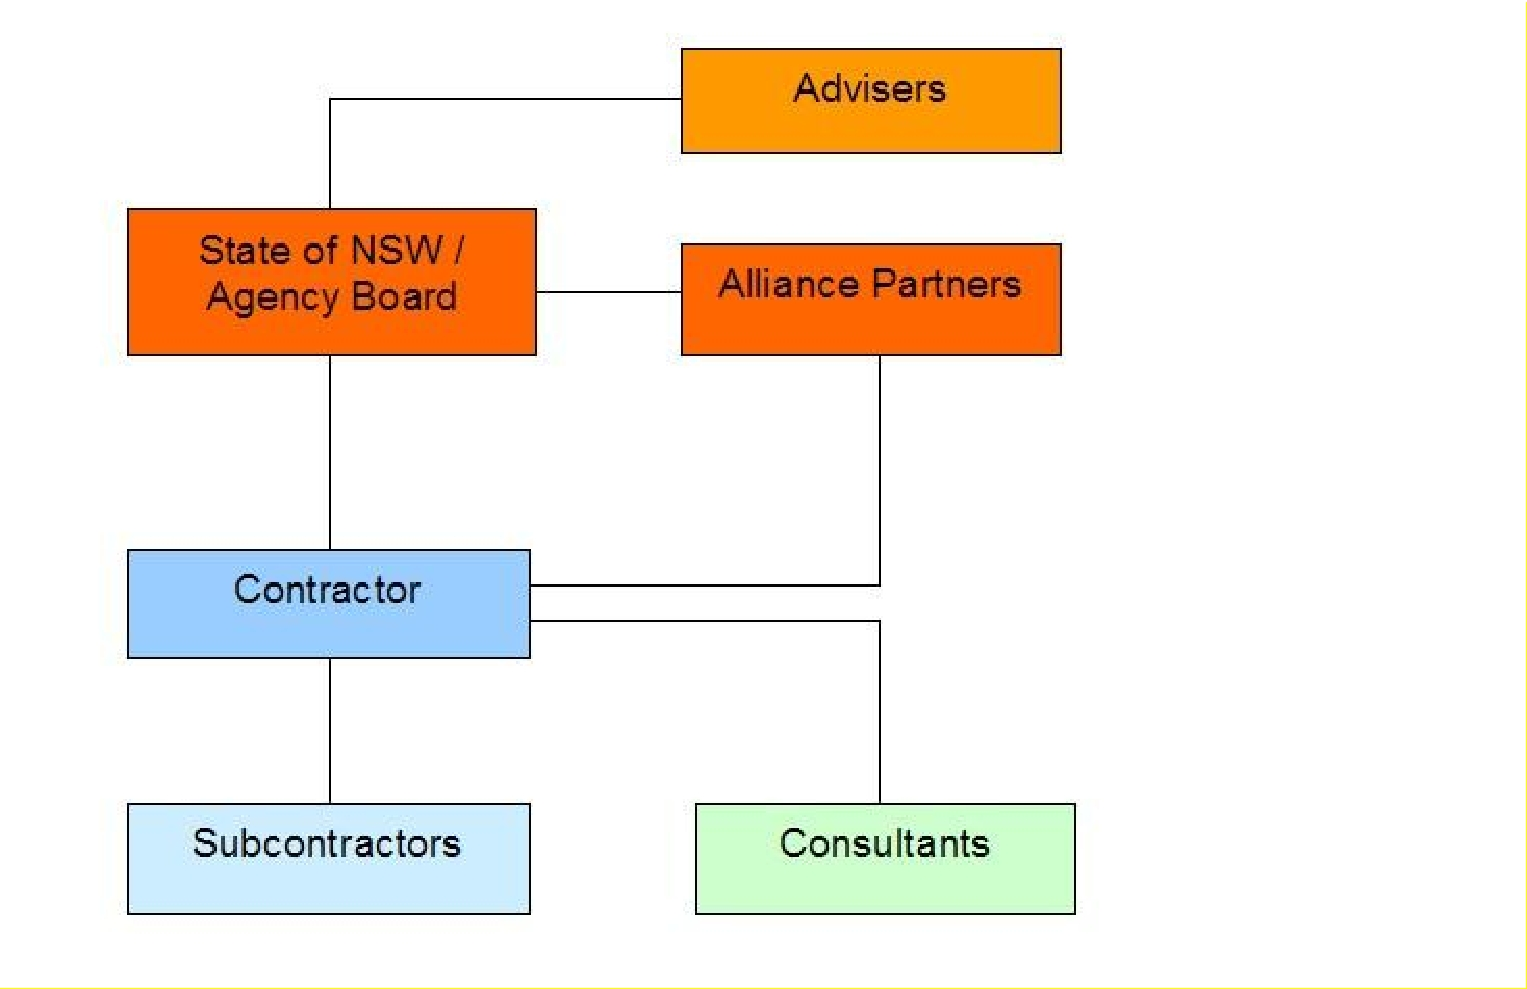 Advisers and contractor report to State of NSW/agency board. Alliance partners report to both State of NSW/agency board and contractor. Subcontractors and consultants report to contractor.